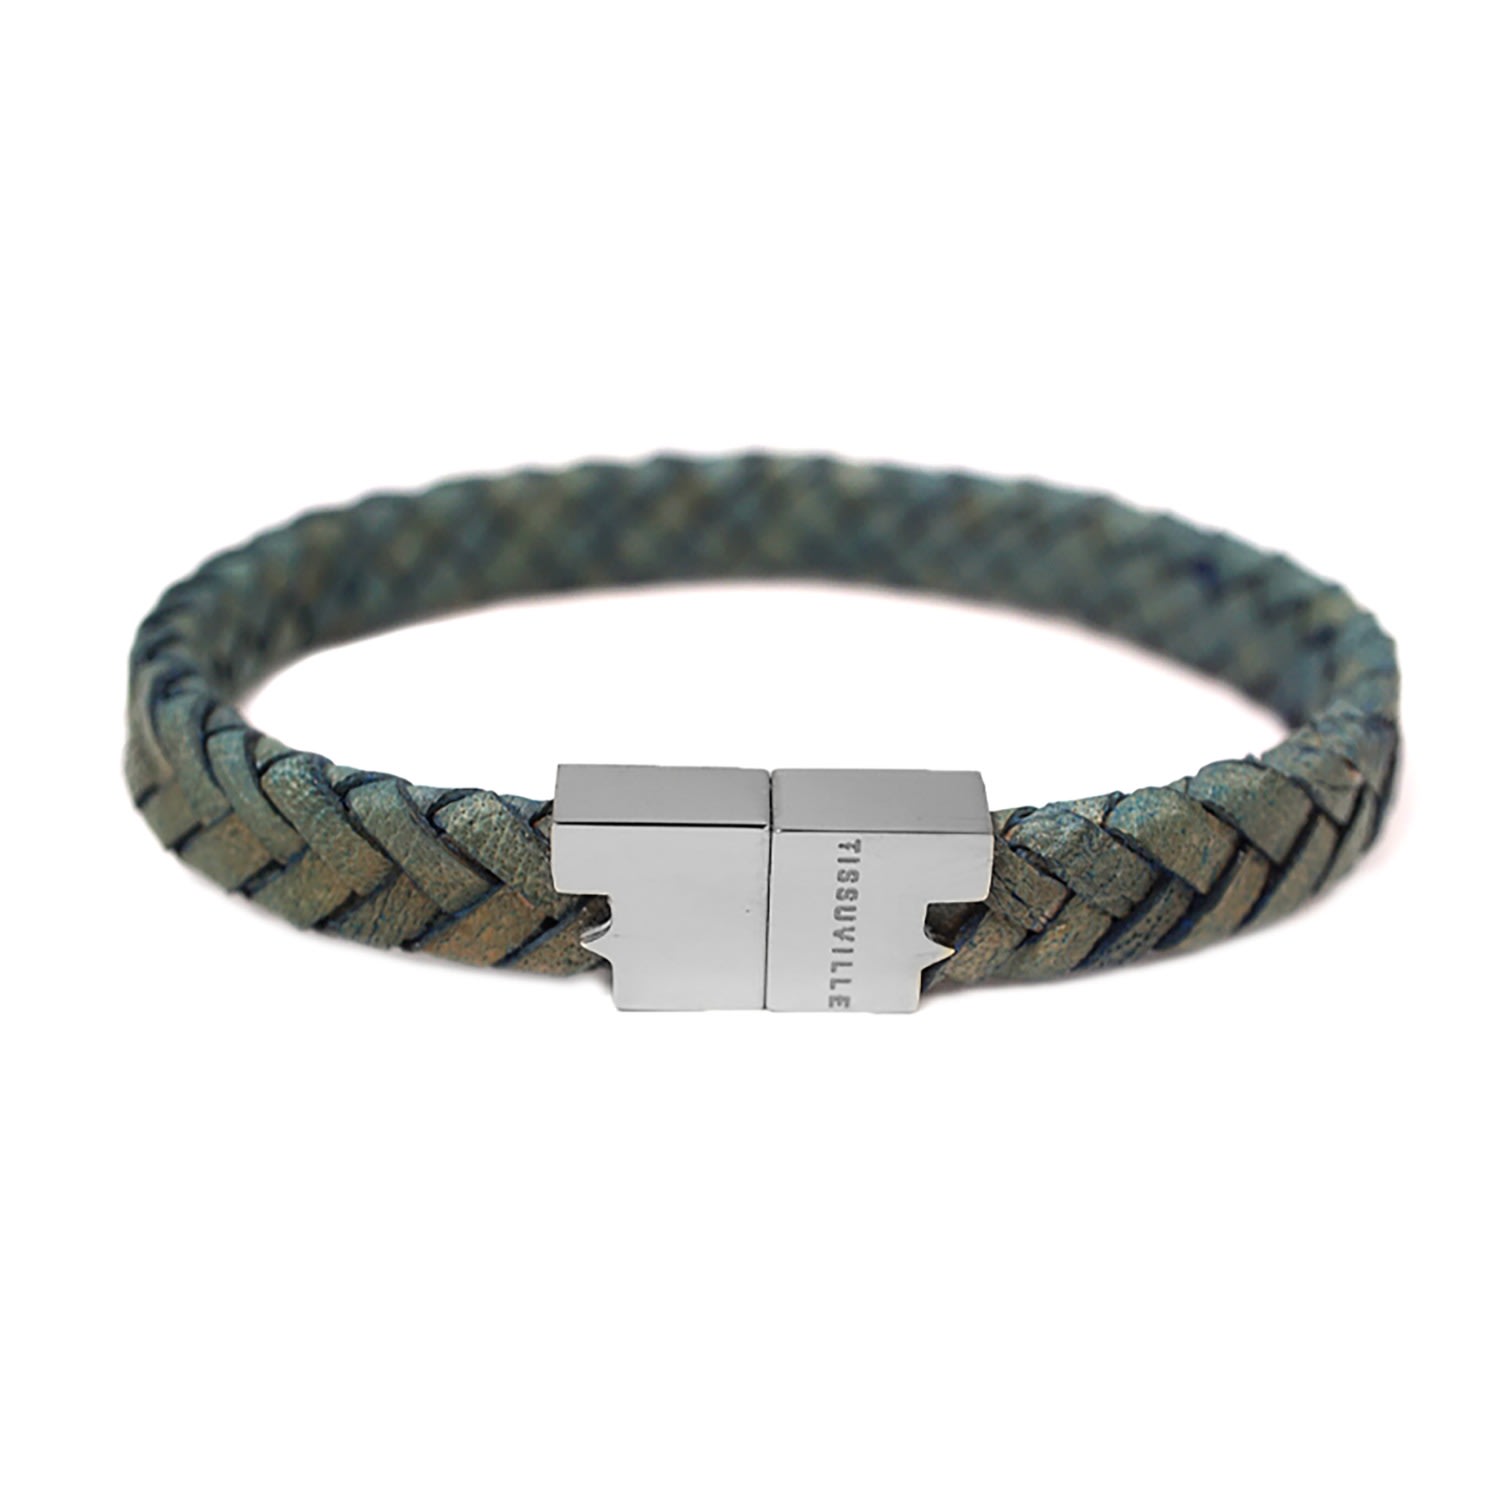 Men's Jade Green Braided Leather Bracelet With Silver-Tone Hardware - Green Tissuville